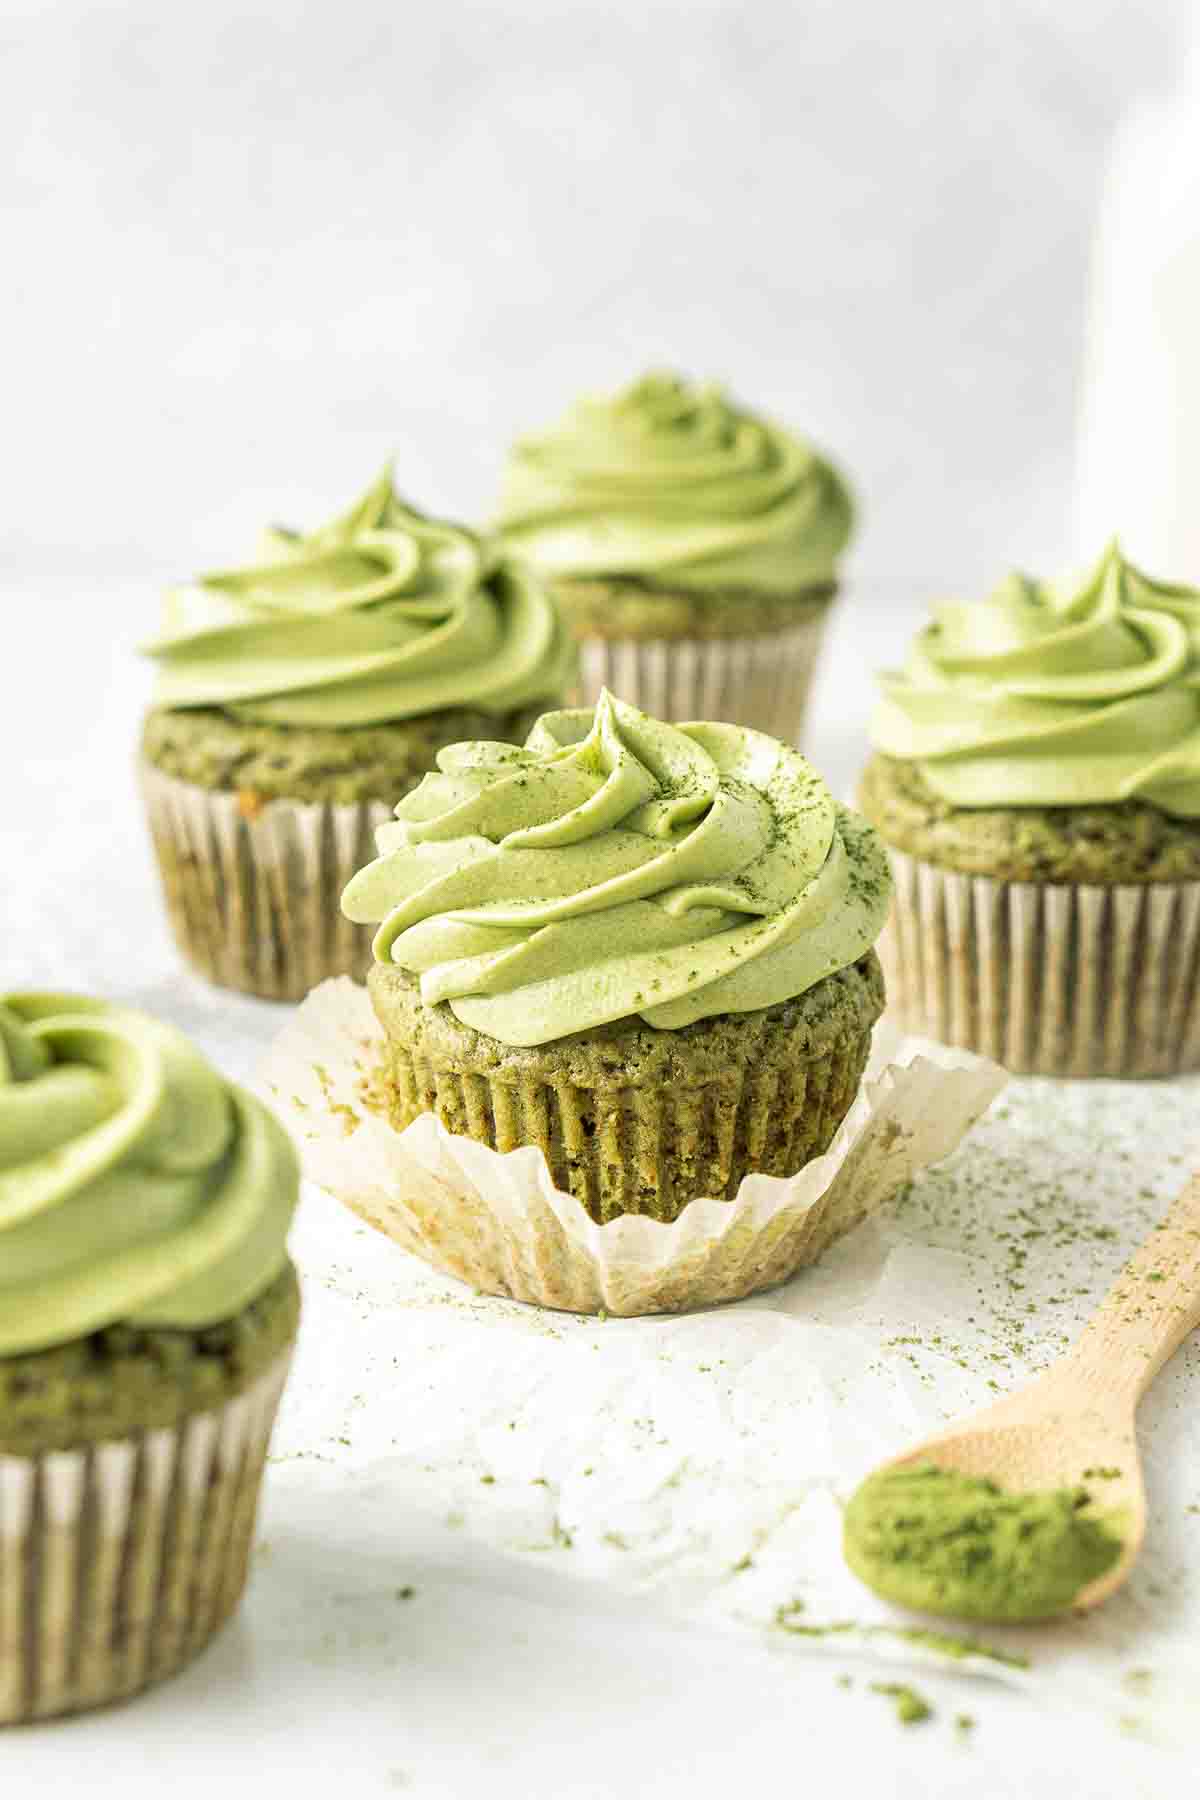 Close up of dairy free matcha cupcakes, one with the liner removed showing a green cake.